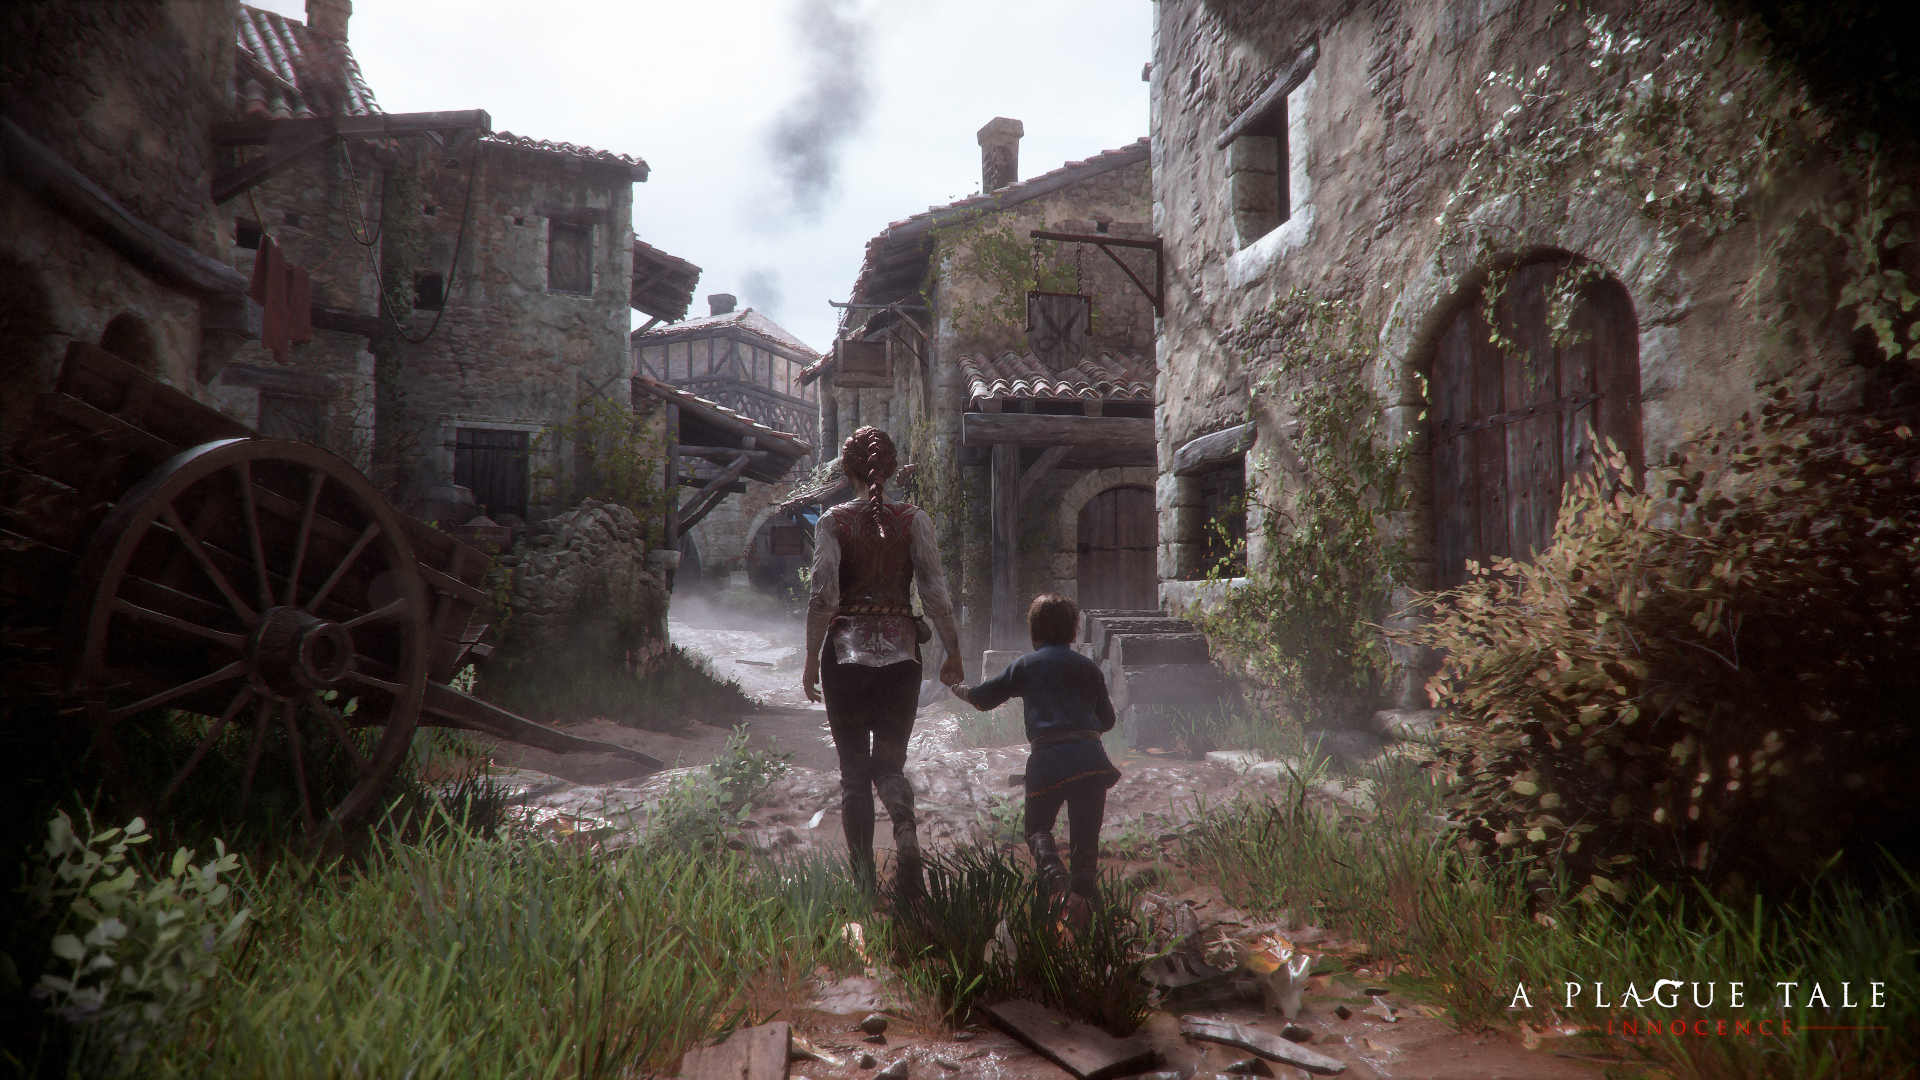 Beware the Rat Swarm – A Plague Tale: Innocence Available Now on Xbox One